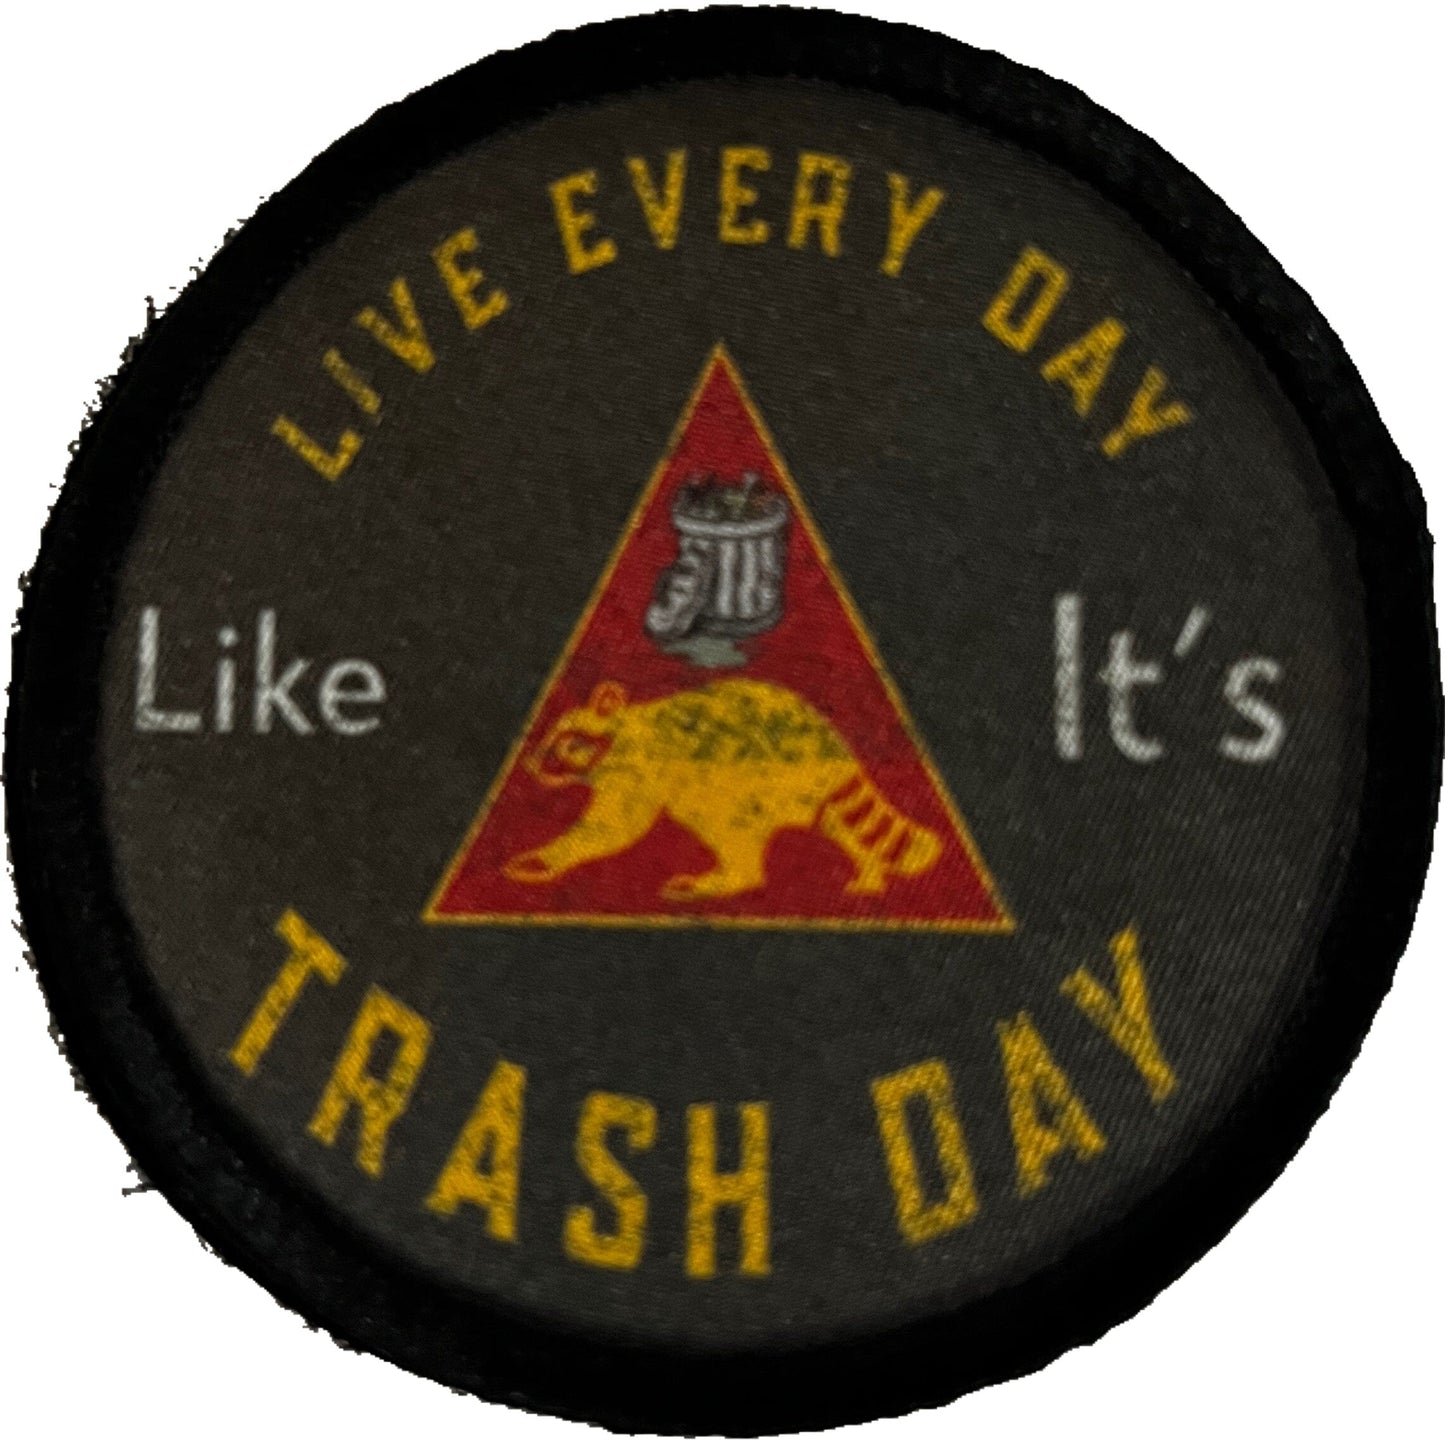 3" Live Everyday Like it's Trash Day Morale Patch Morale Patches Redheaded T Shirts 